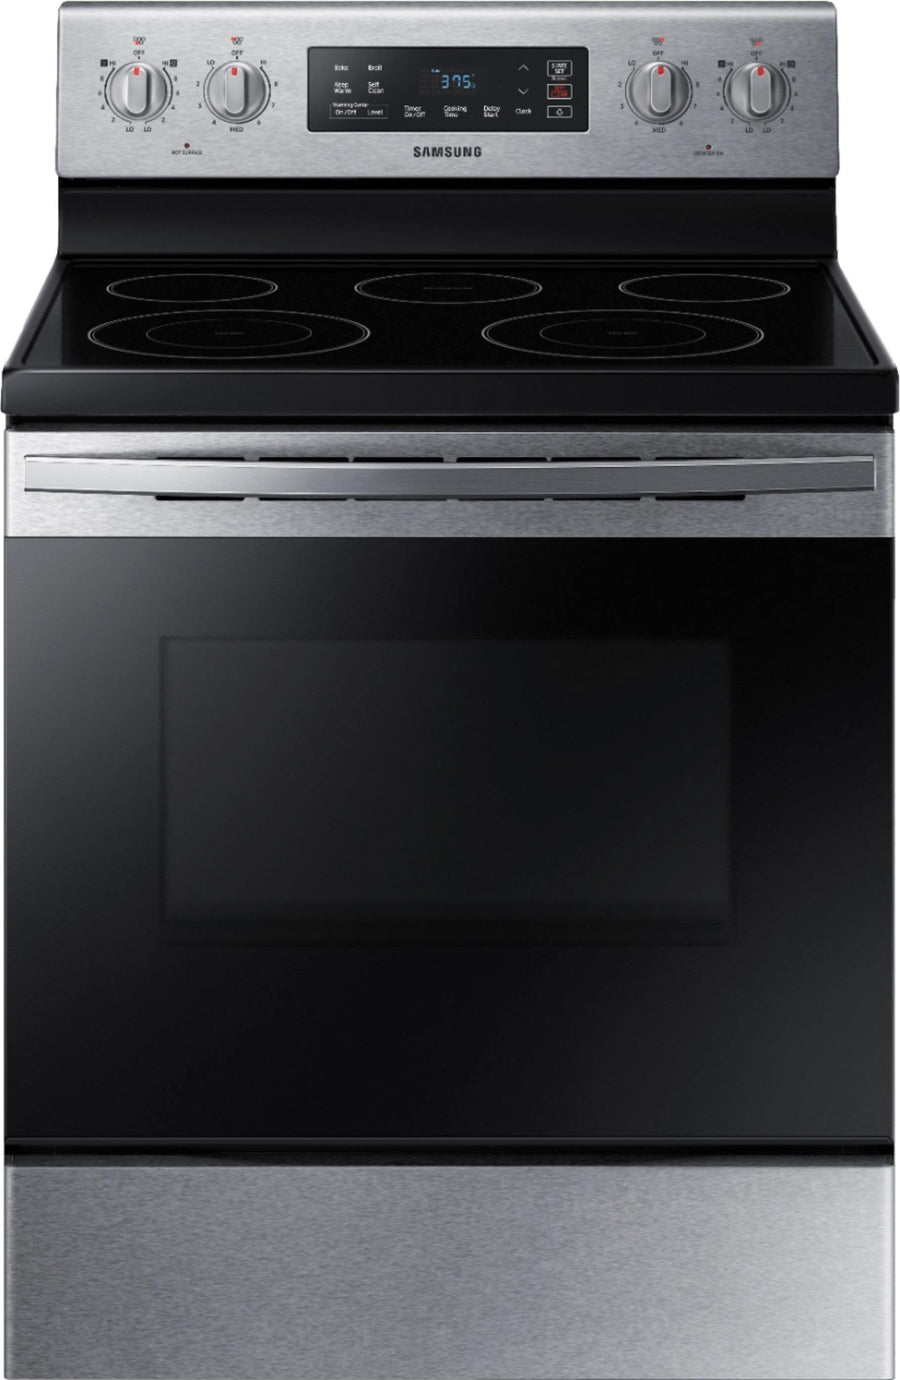 Samsung - 5.9 cu. ft. Freestanding Electric Range with Self-Cleaning - Stainless steel_0